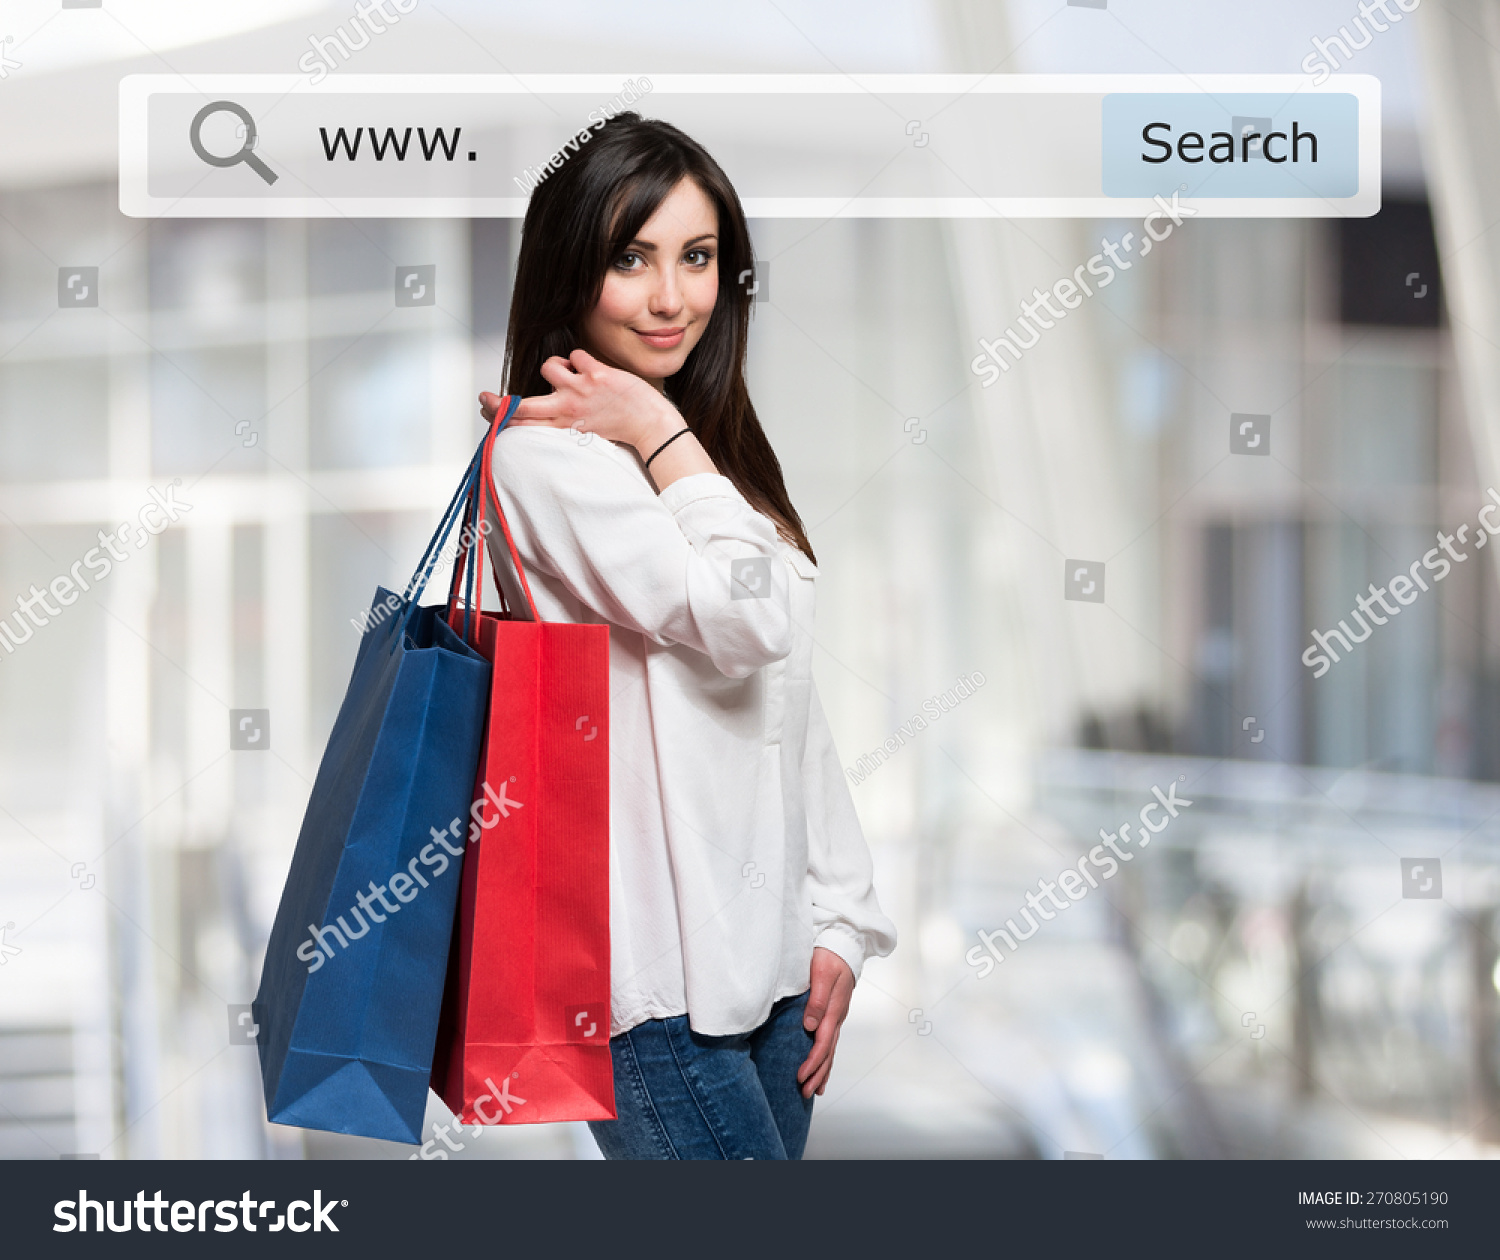 Young woman holding shopping bags in front of a search bar. Ecommerce concept #270805190